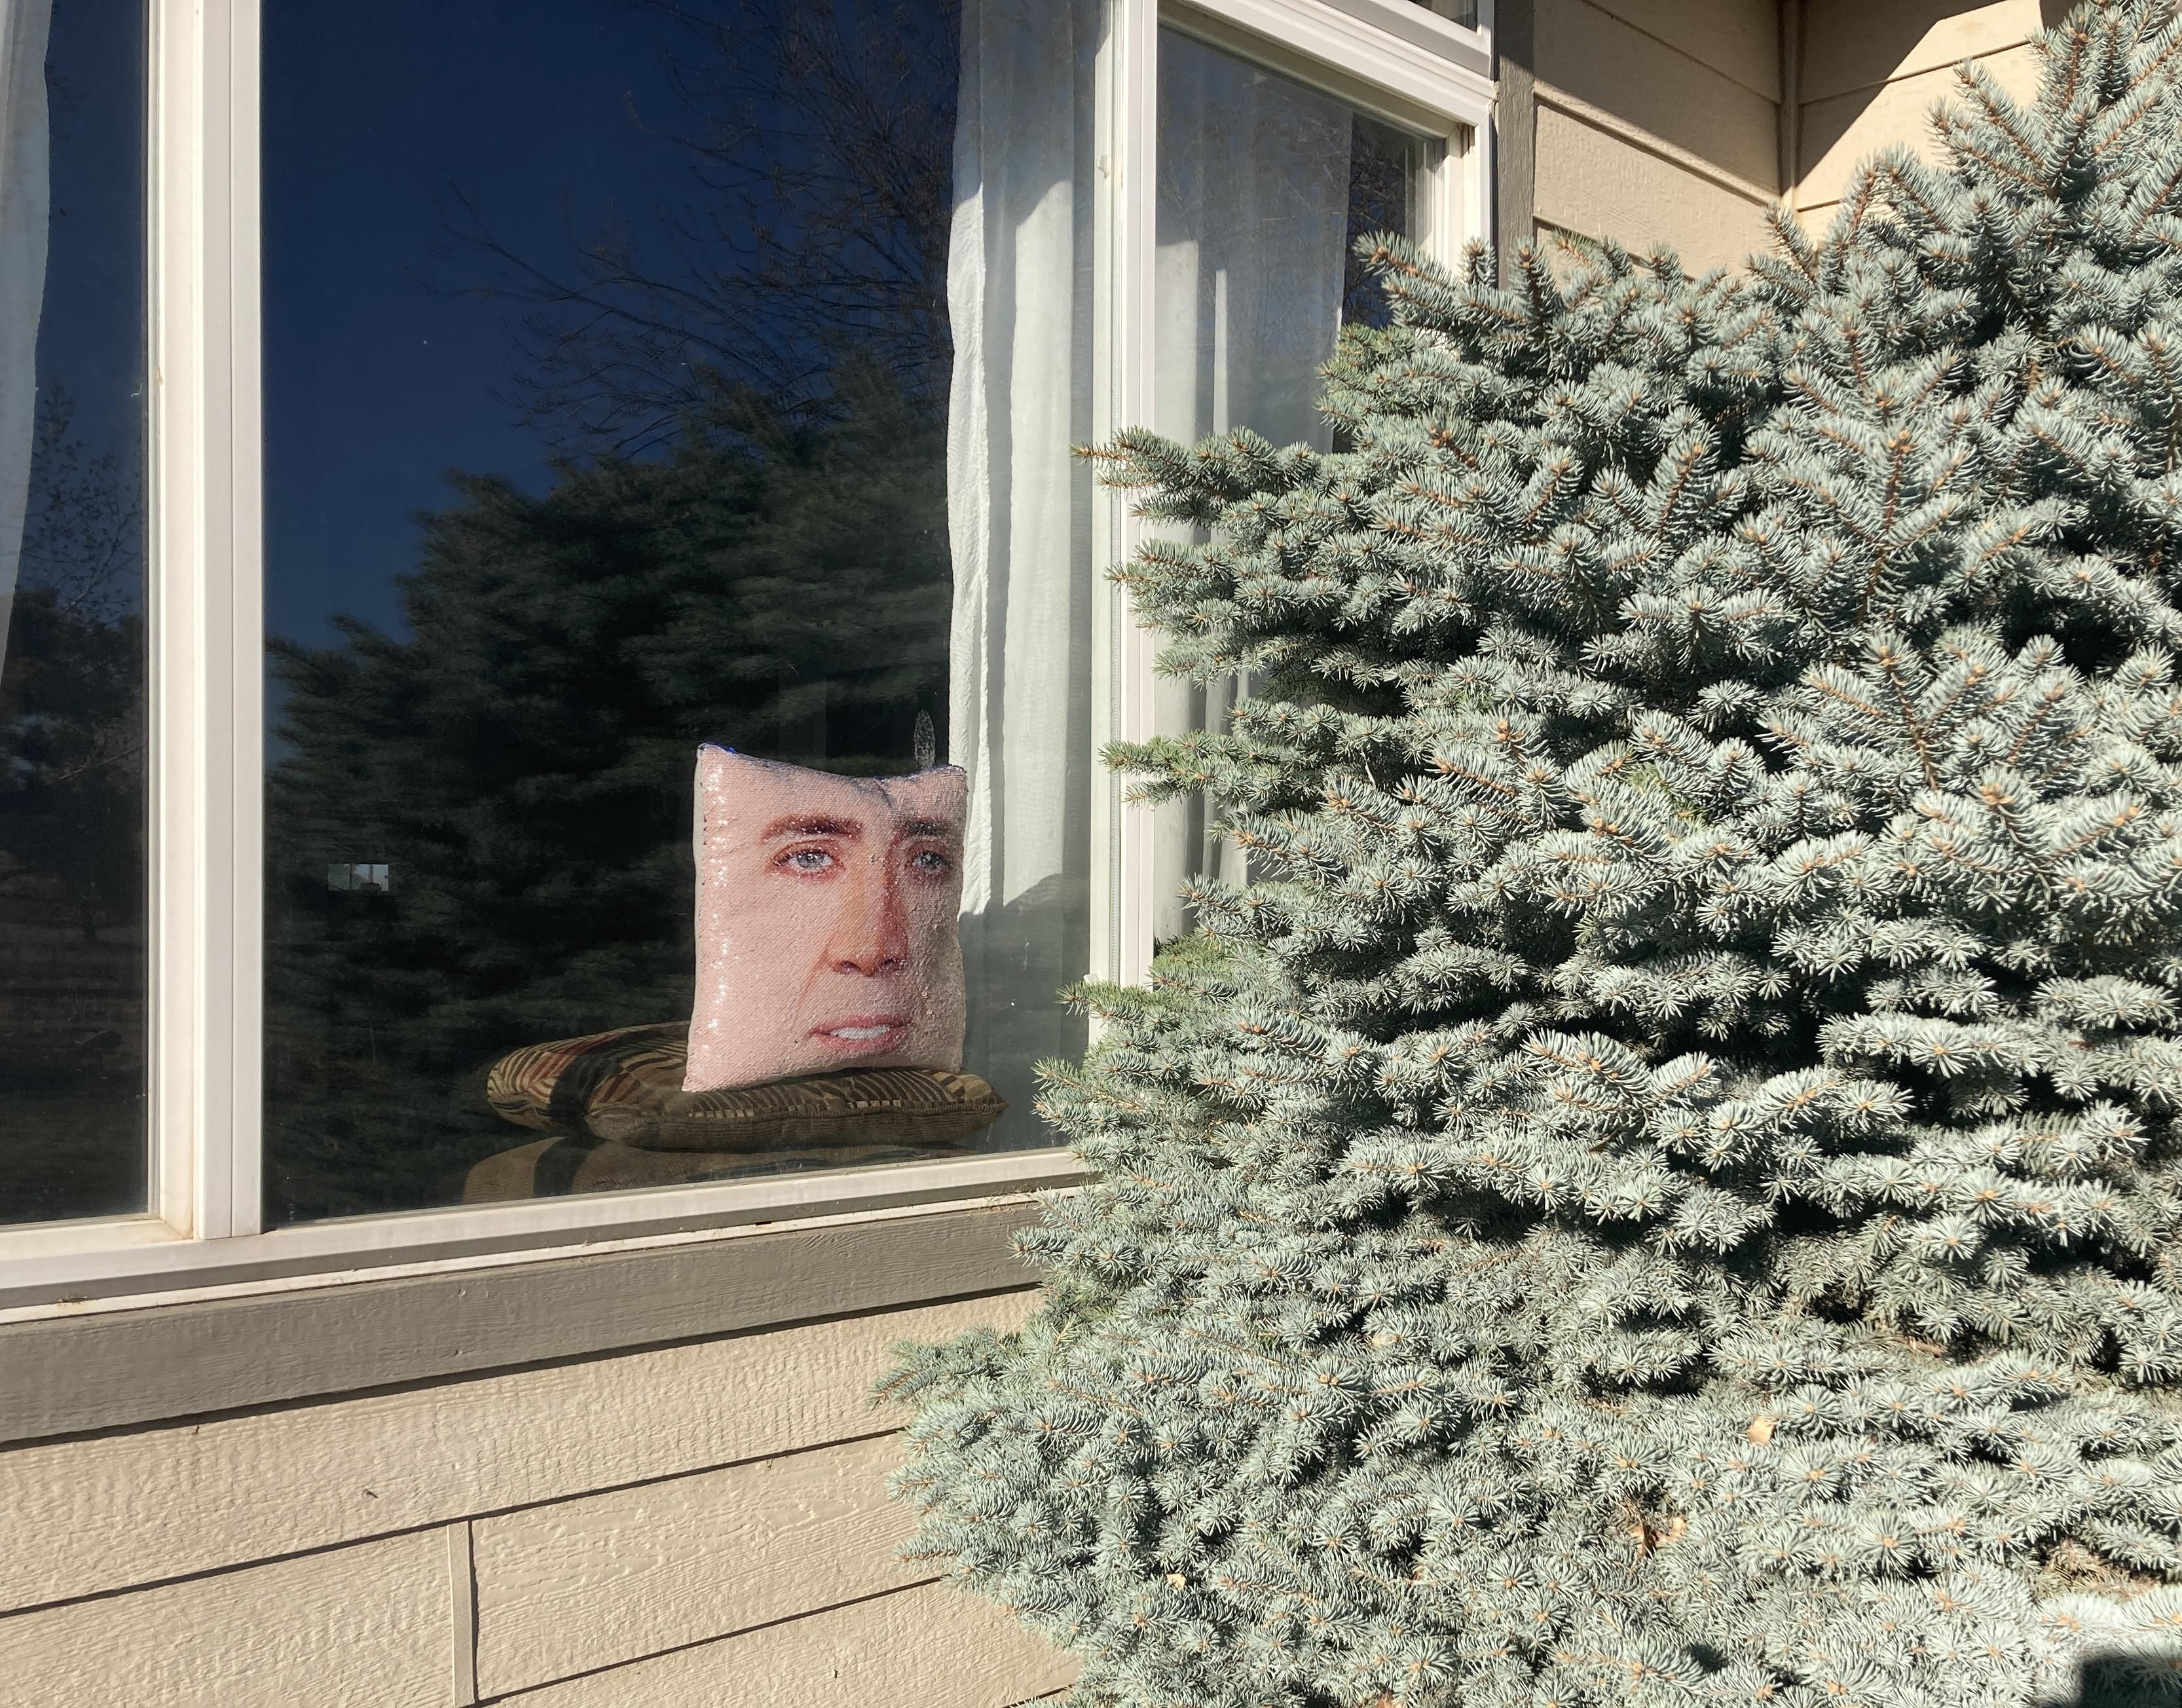 For weeks we’ve been having issues with a bird flying into this window. My daughter’s Nicolas Cage pillow solved the problem.